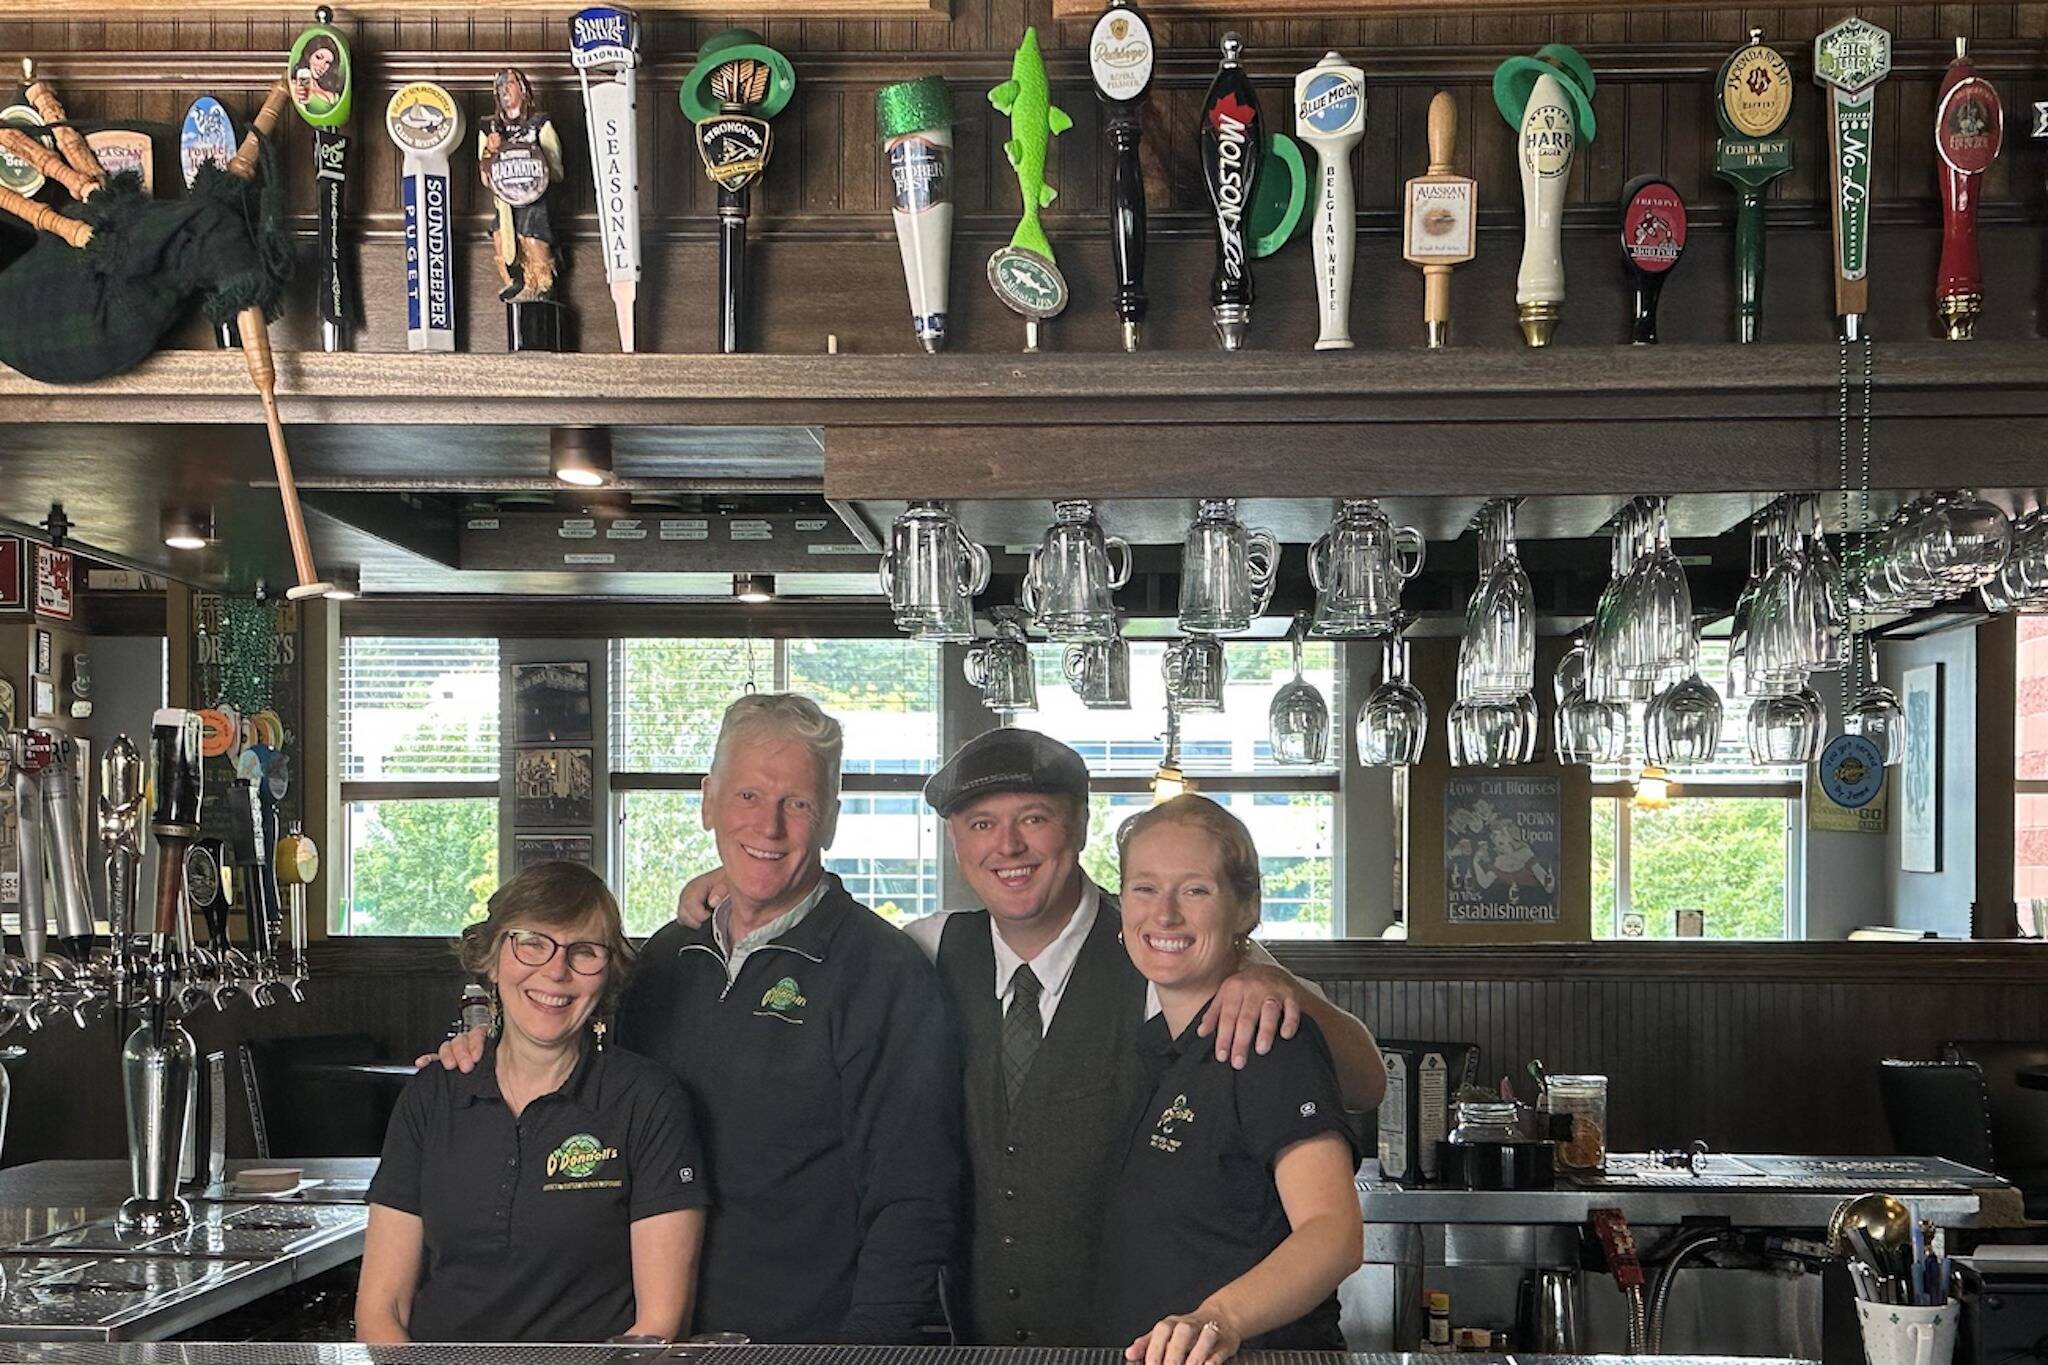 The O’Donnell family pose for a photo in one of the Shawn O’Donnell’s restaurants. Left, Tina O’Donnell, Shawn O’Donnell, Shawn O’Donnell Jr. and Sophie Taylor. (Photo provided by Shawn O’Donnell’s)